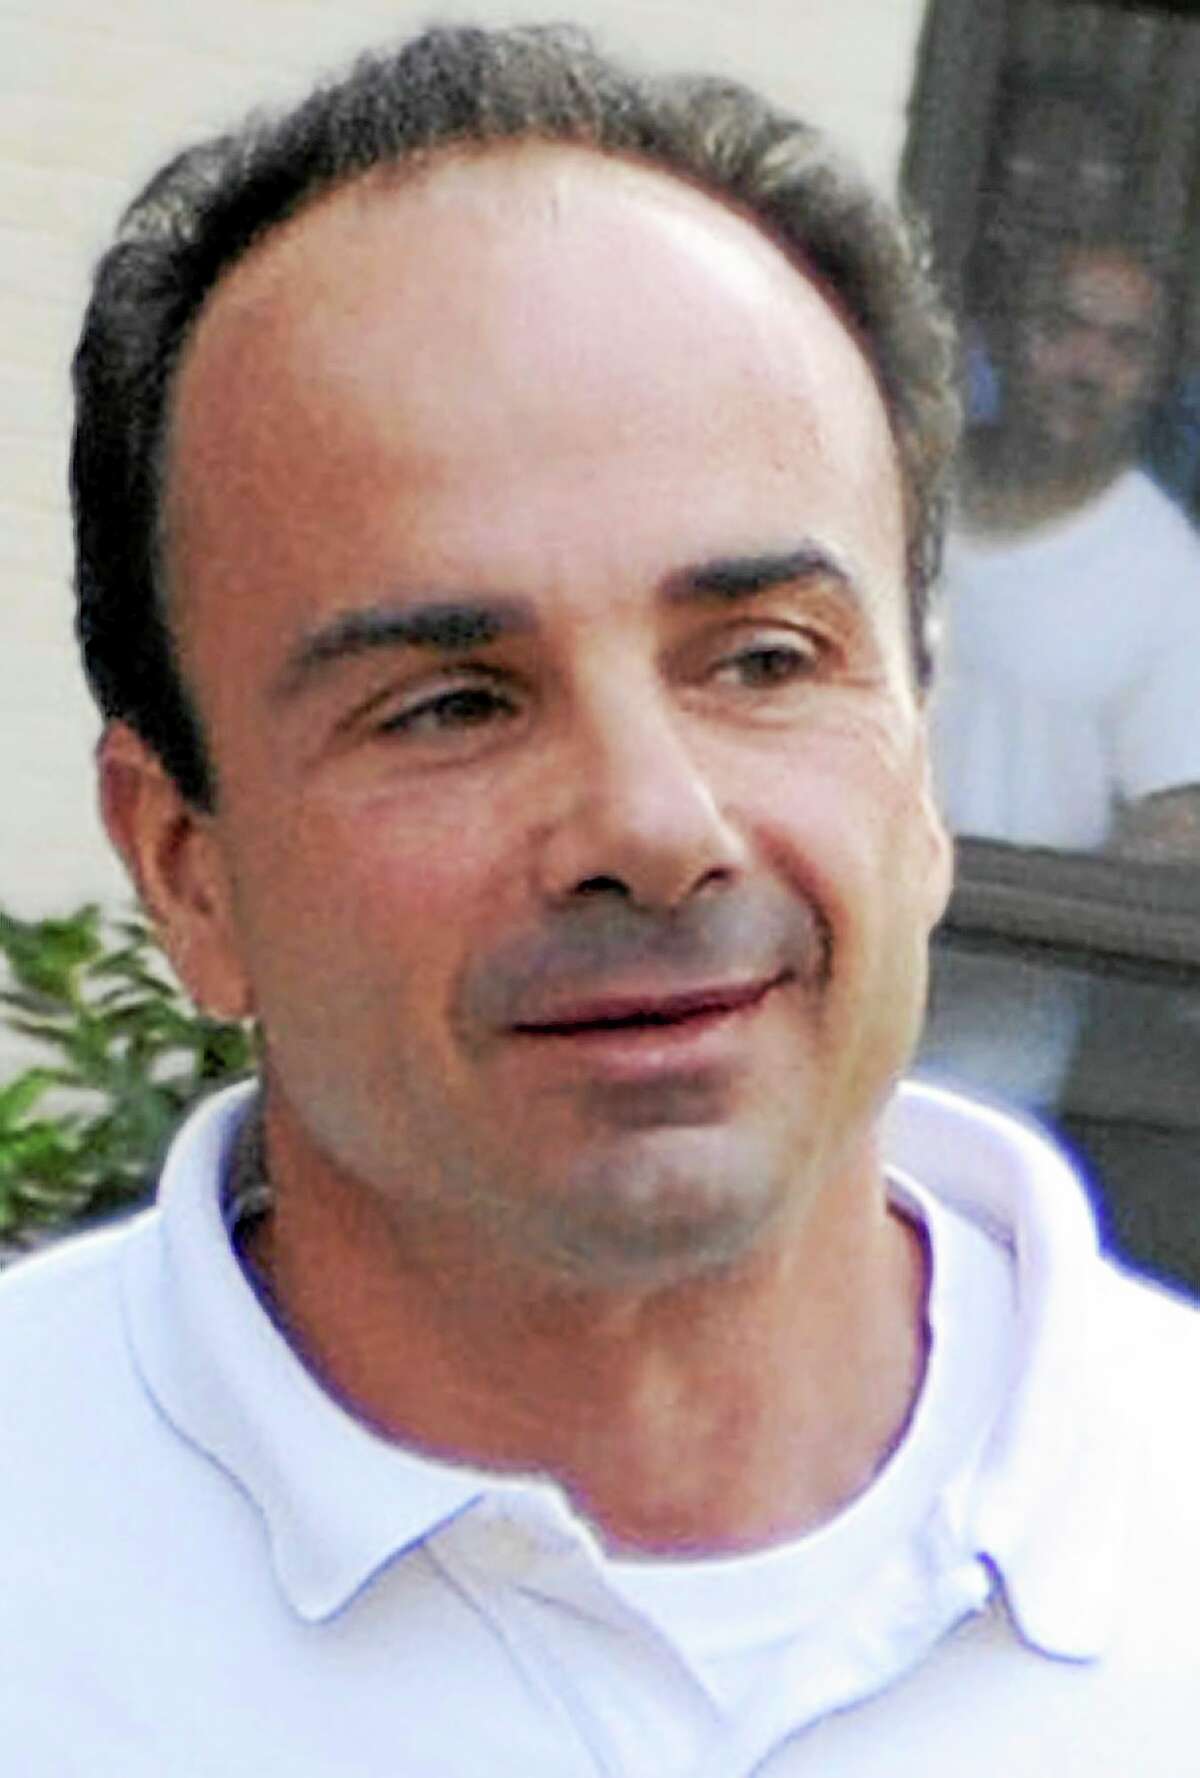 In this July 19, 2010 photo, former Bridgeport Mayor Joseph Ganim leaves a halfway house in Hartford, Conn. Ganim was sentenced to nine years in prison in 2003 for corruption, and was released in 2010 after serving almost seven years.